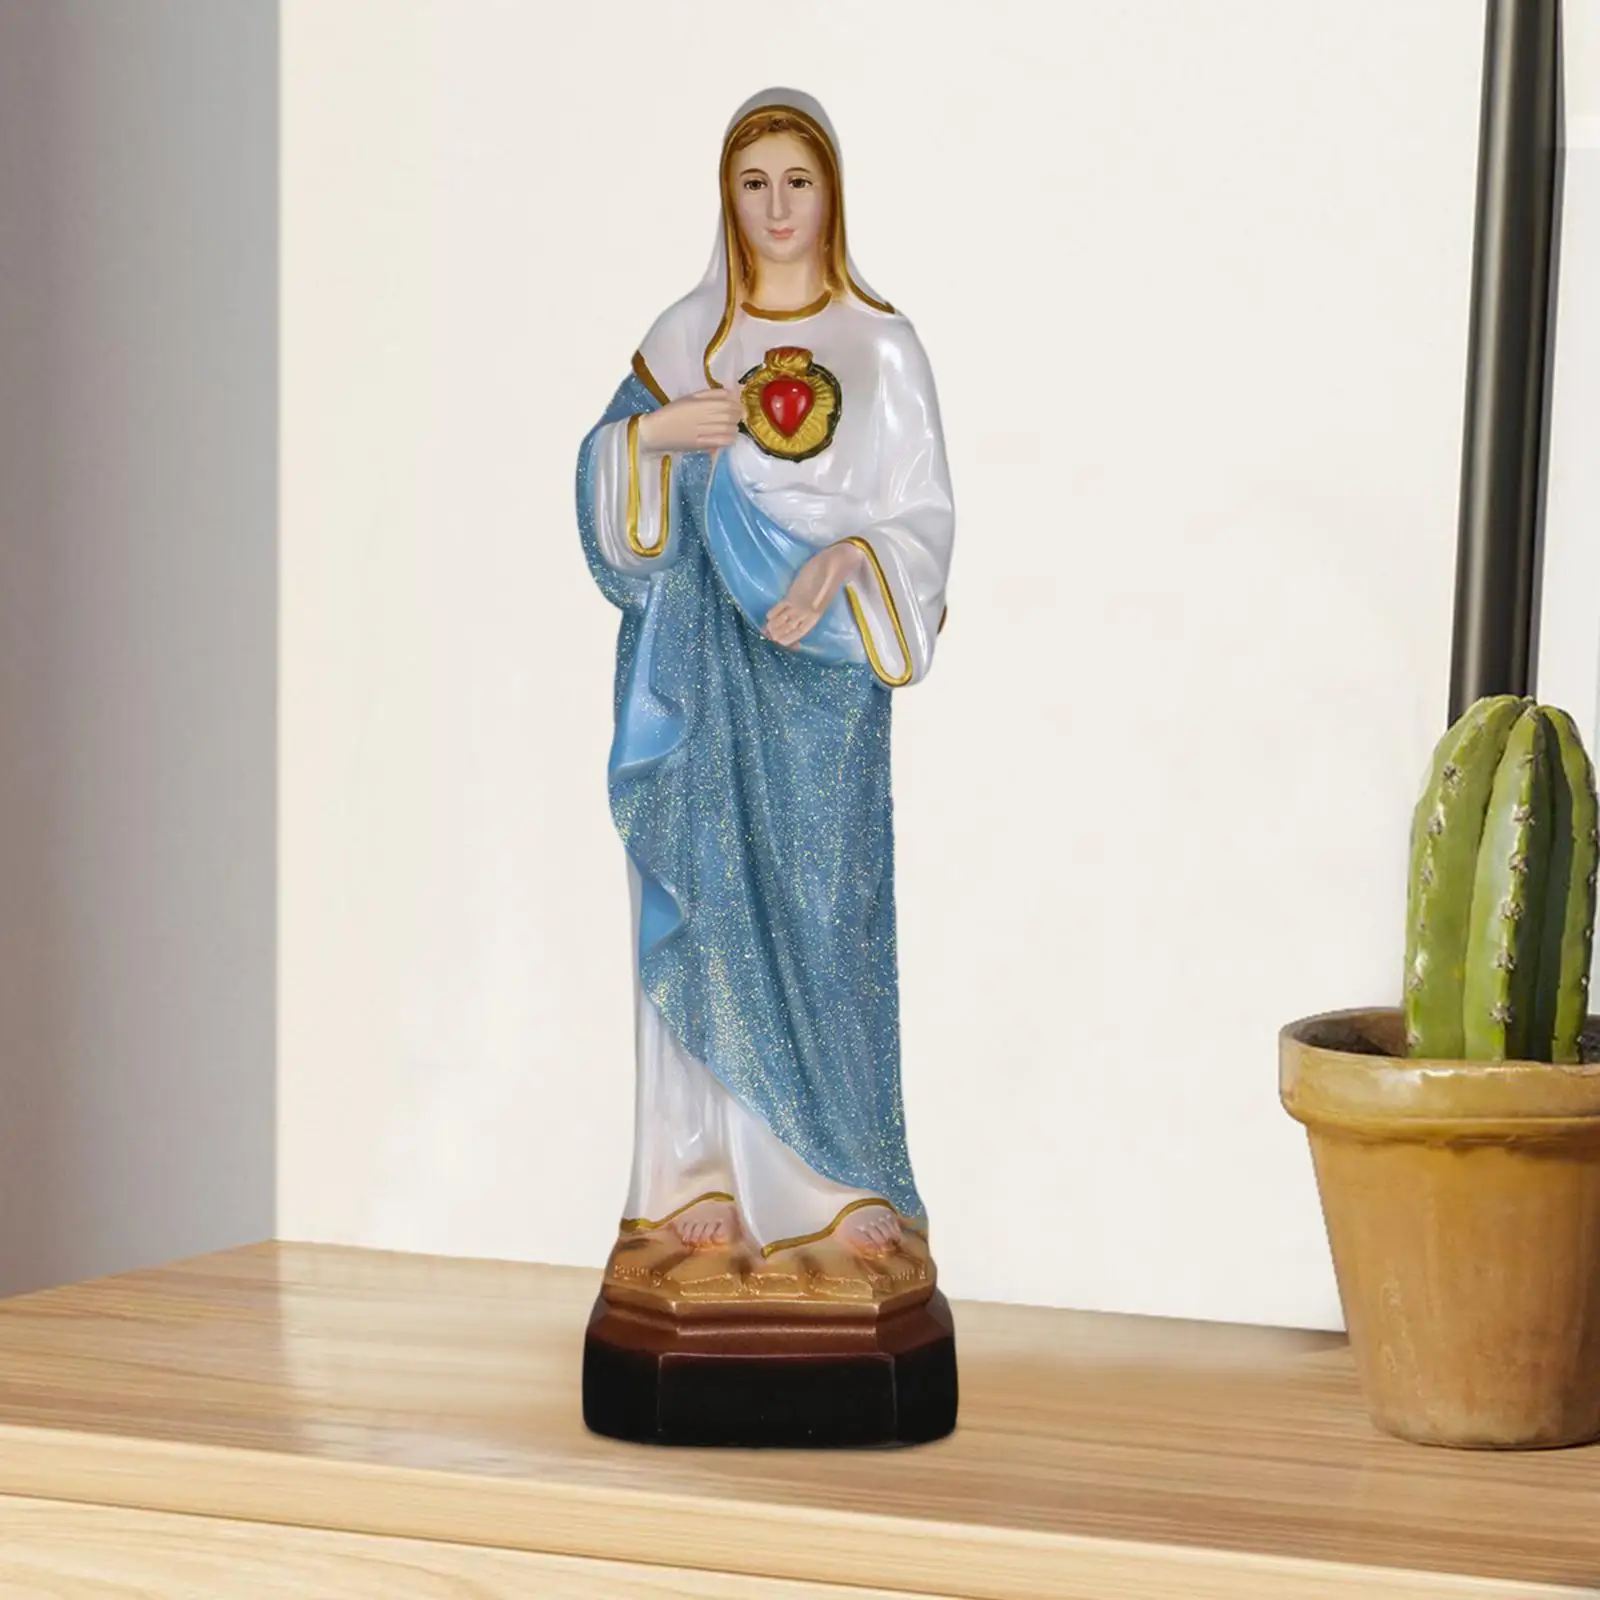 Our Lady Figure Collection Religious Gifts Christmas Decoration Decorative Ornament 13.78